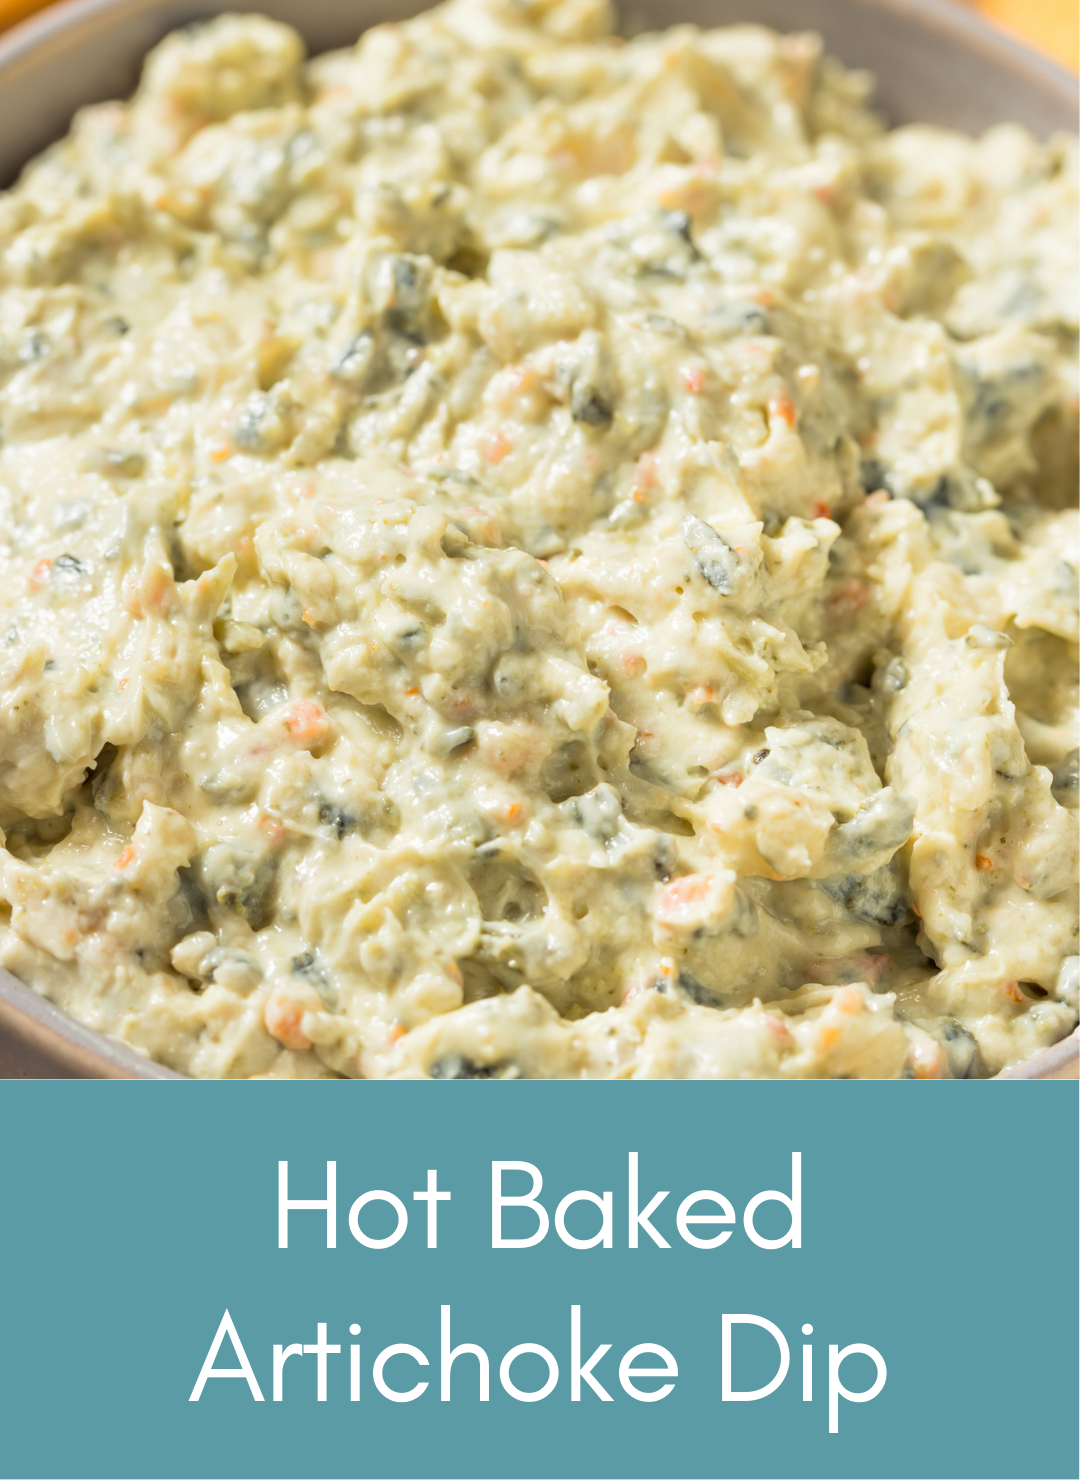 whole food plant based baked artichoke dip side dish Picture with link to recipe